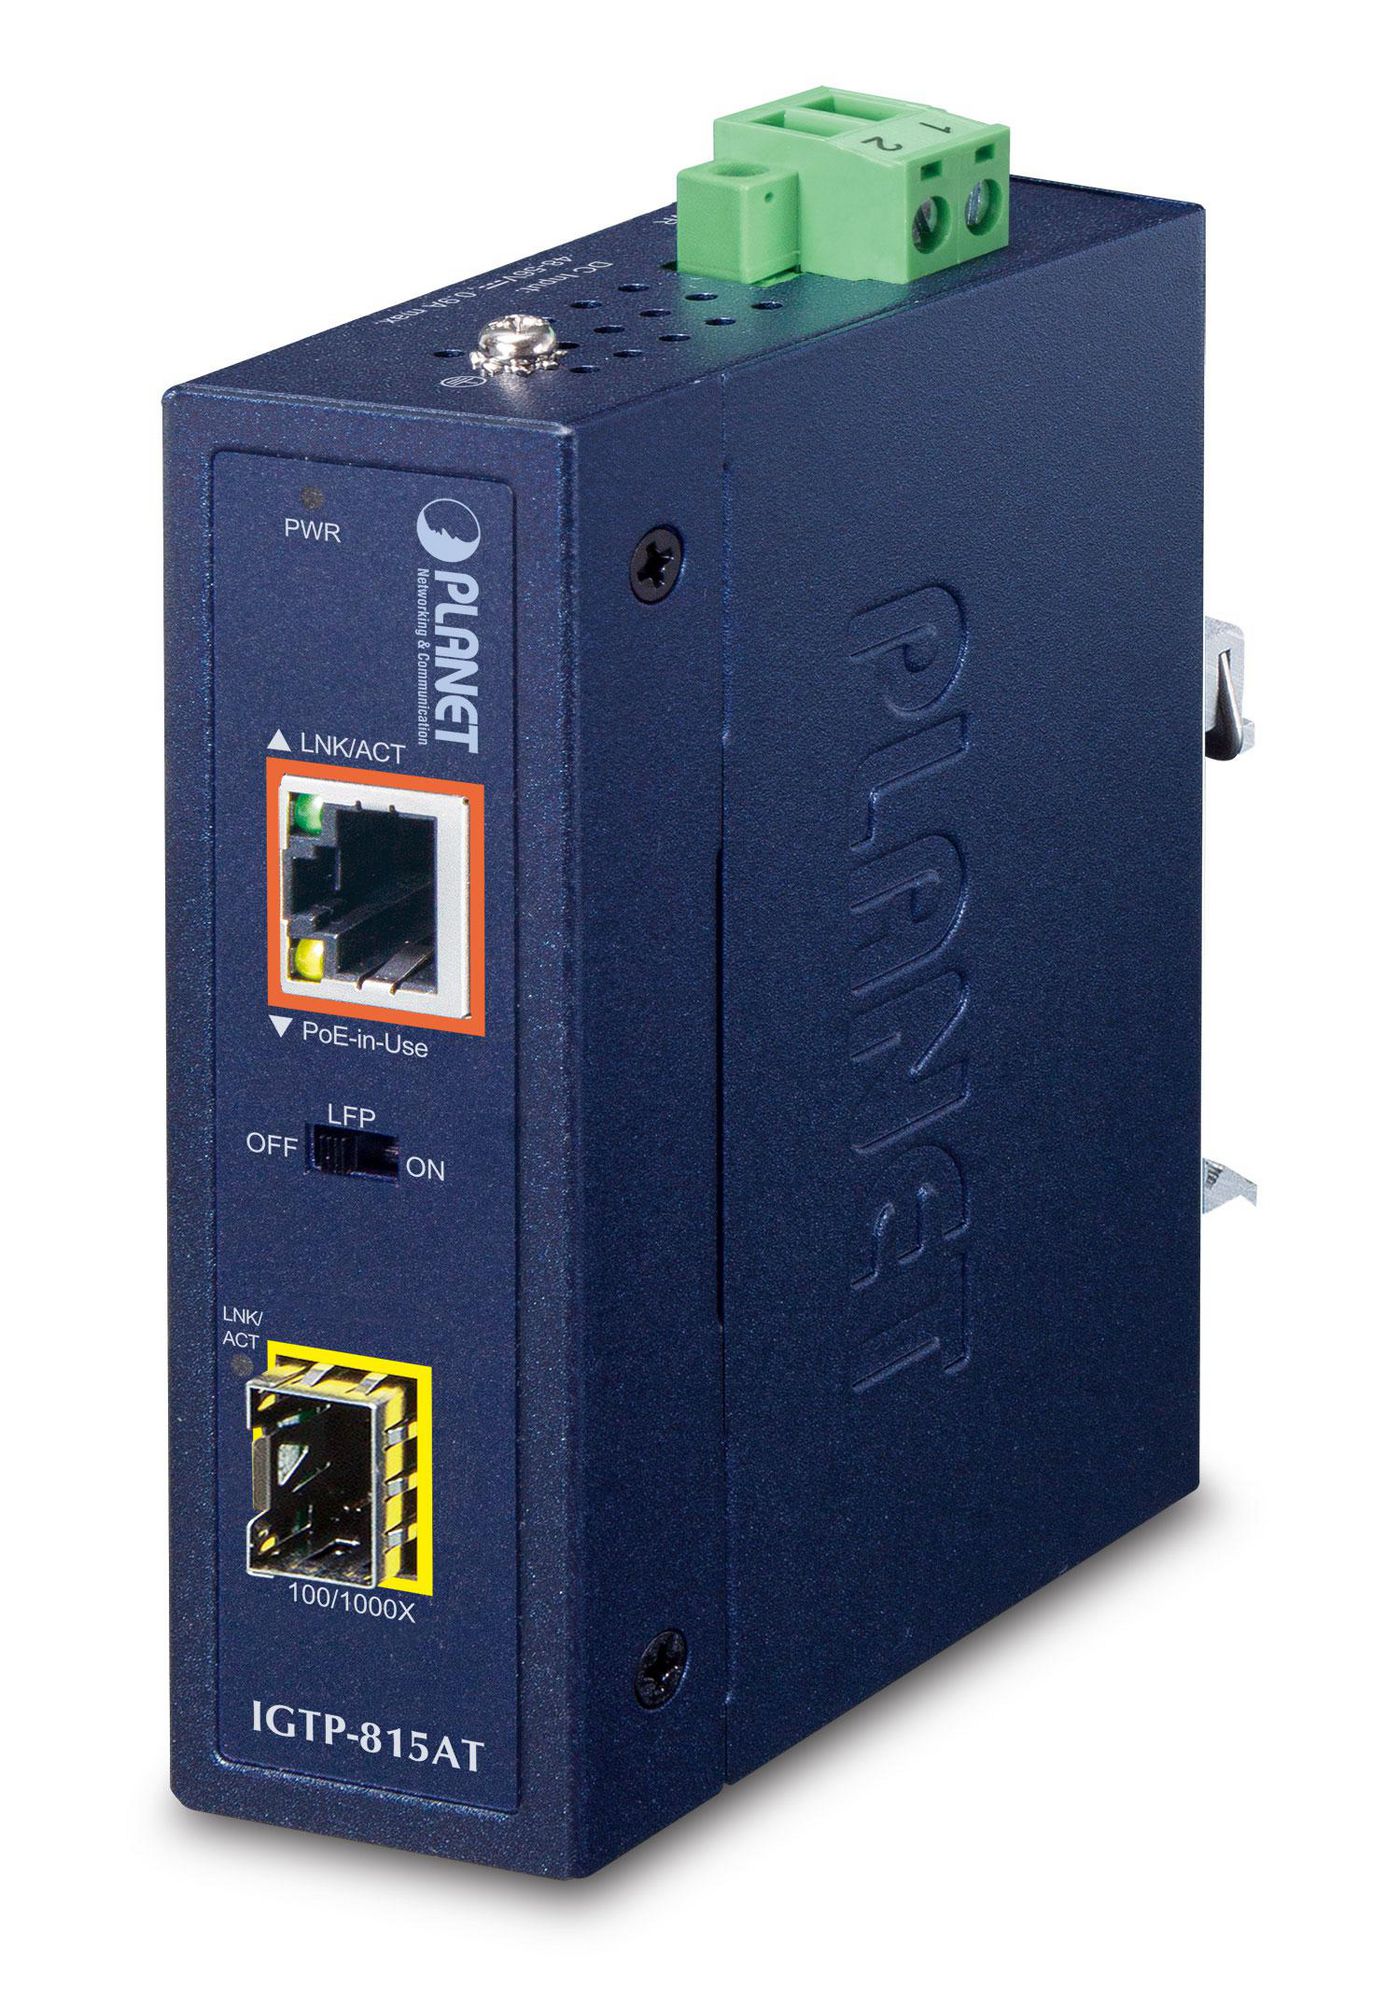 Planet IGTP-815AT IP30 Compact size Industrial 